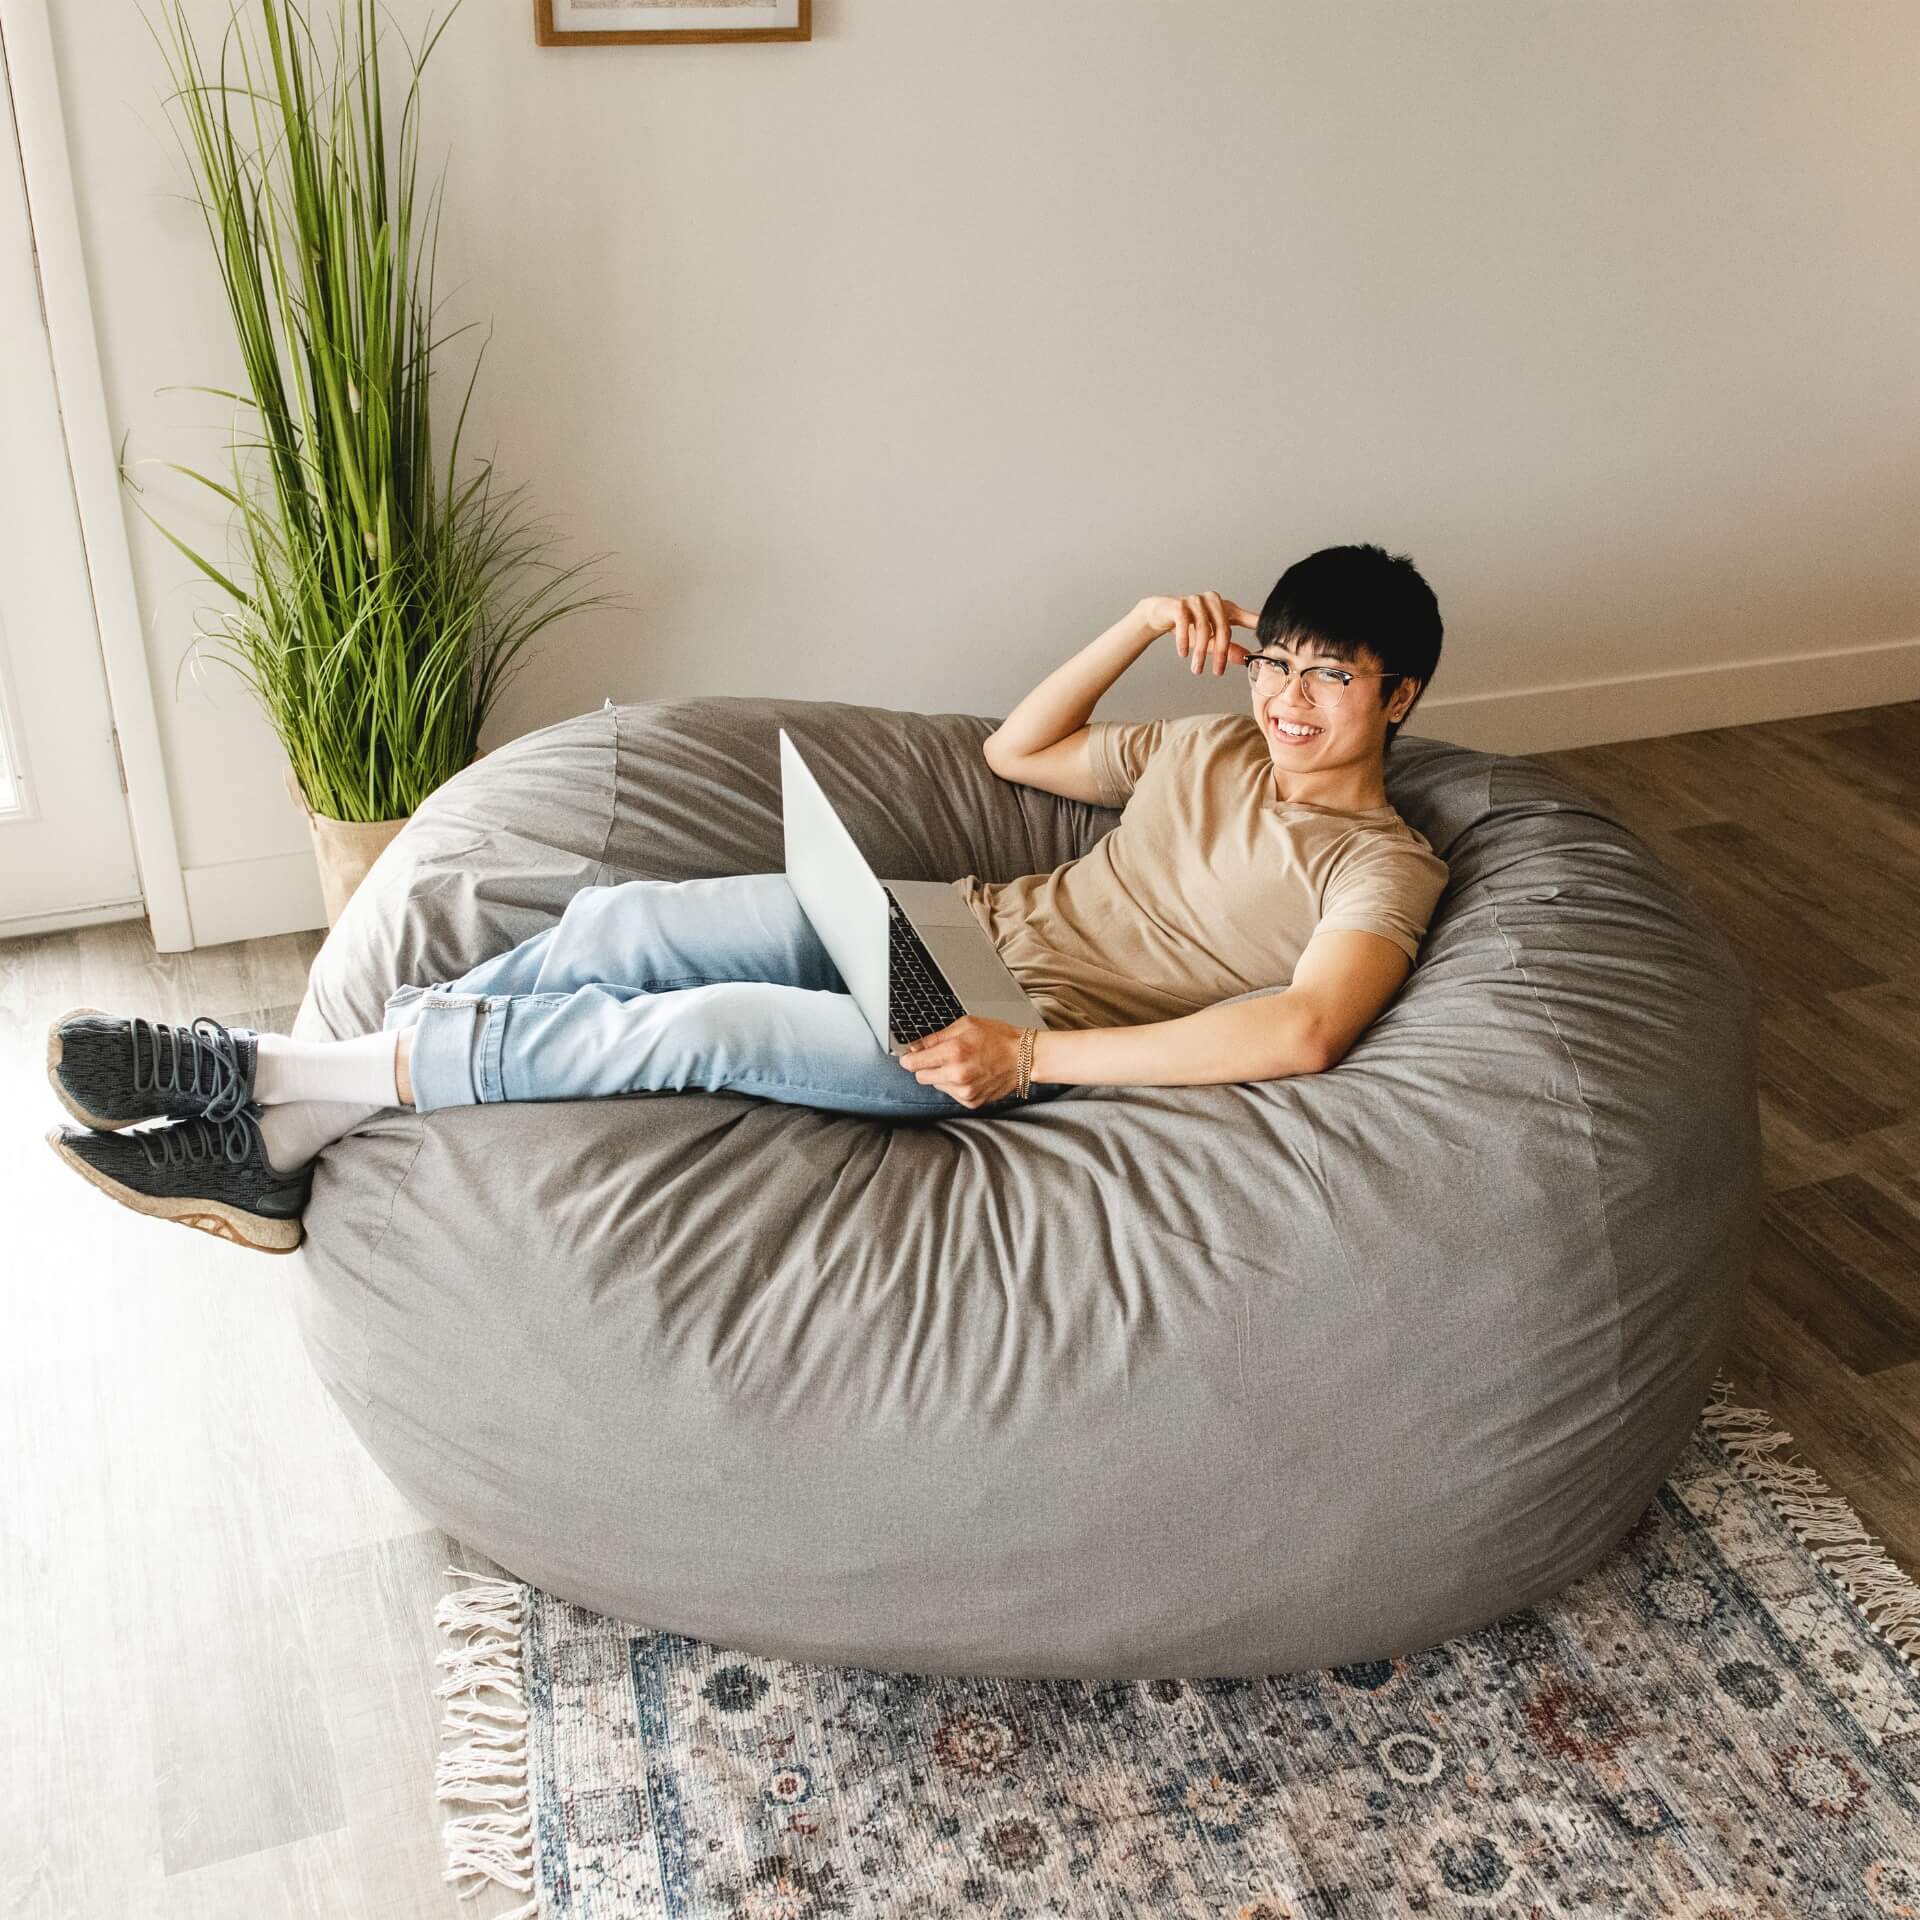 Relaxation and Comfort: Surprising Health Benefits of Bean Bag Chairs